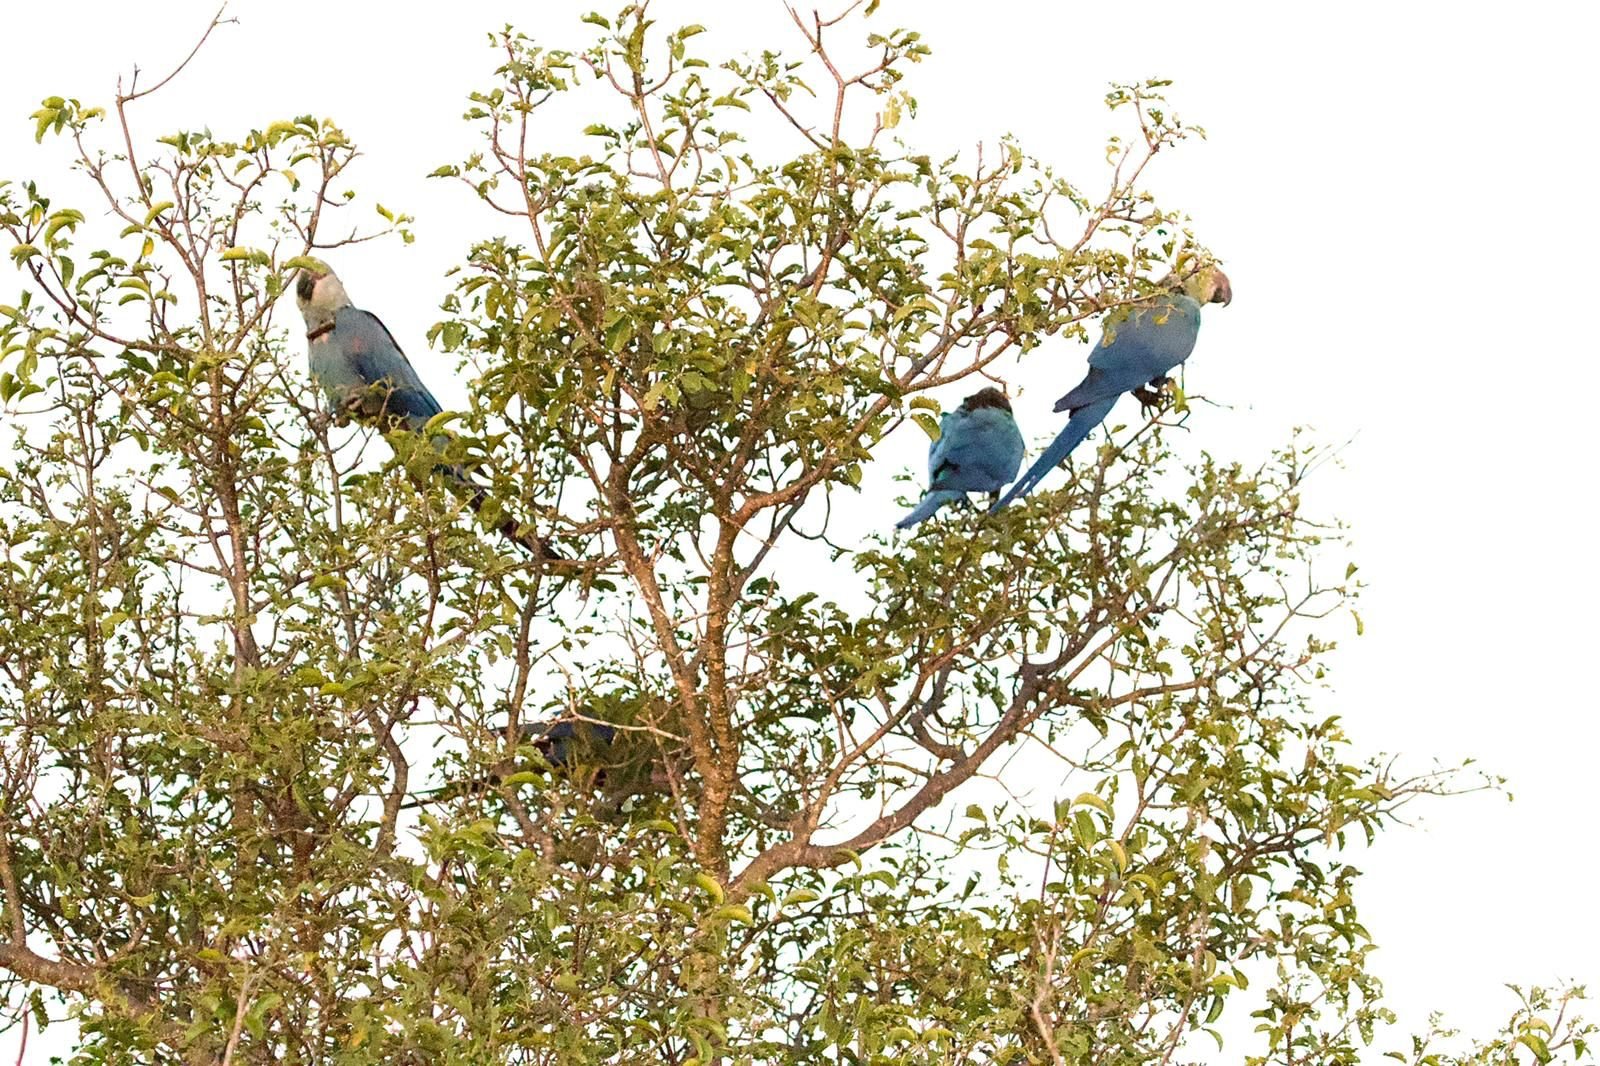 Spix’s macaw—once extinct in the wild—bounces back in Brazil - BrightVibes